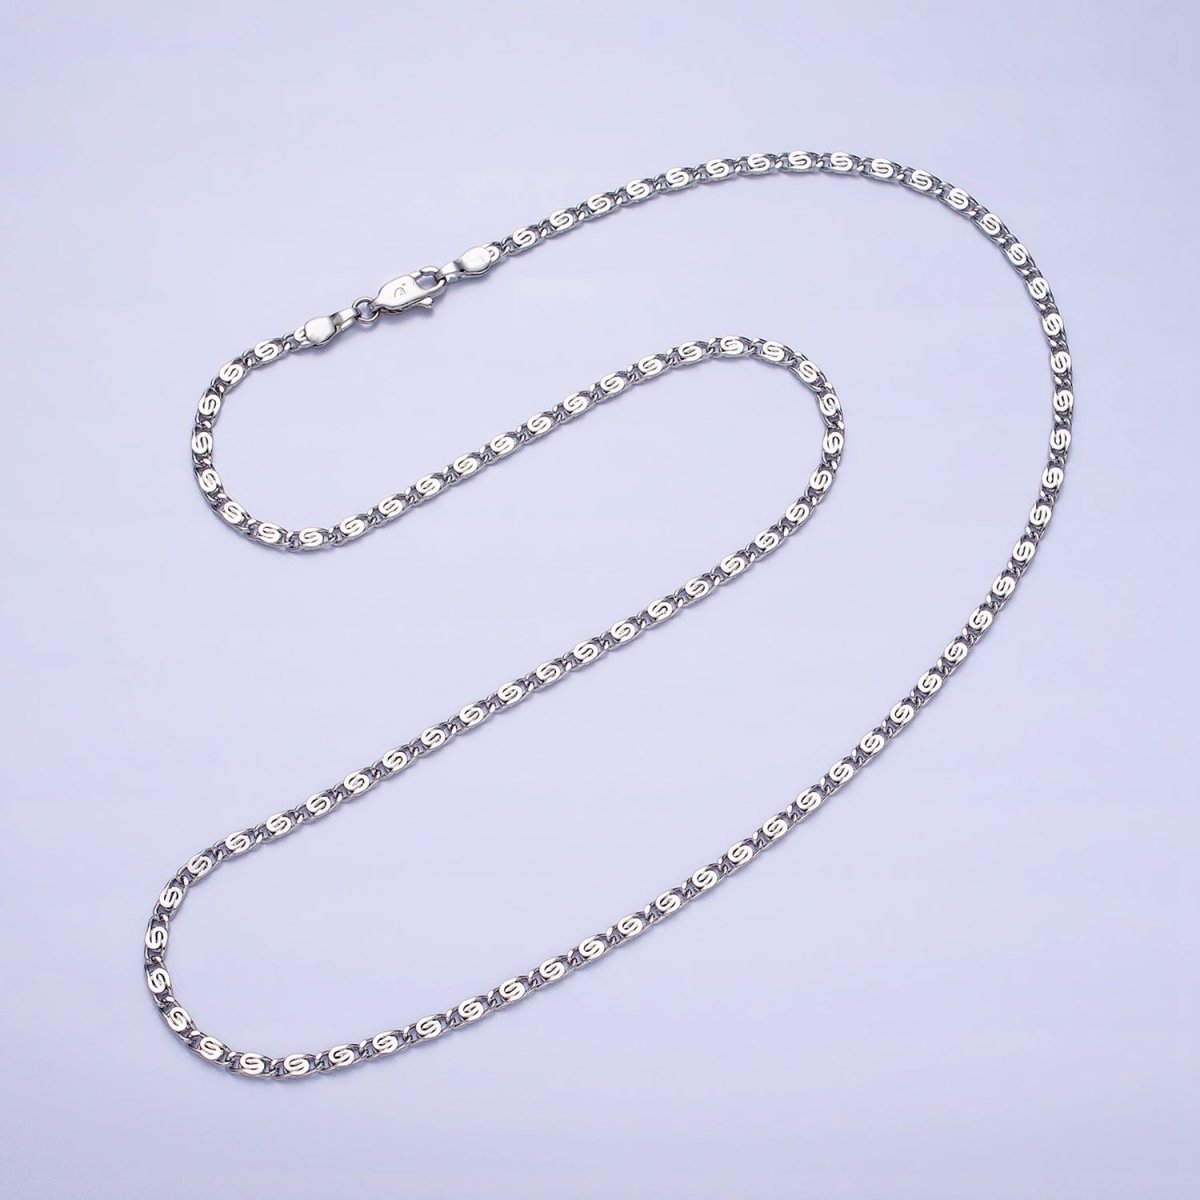 Dainty Scroll Chain - 2.5mm wide Silver Necklace Chain 19.75 inch | WA-1736 WA-1861 Clearance Pricing - DLUXCA